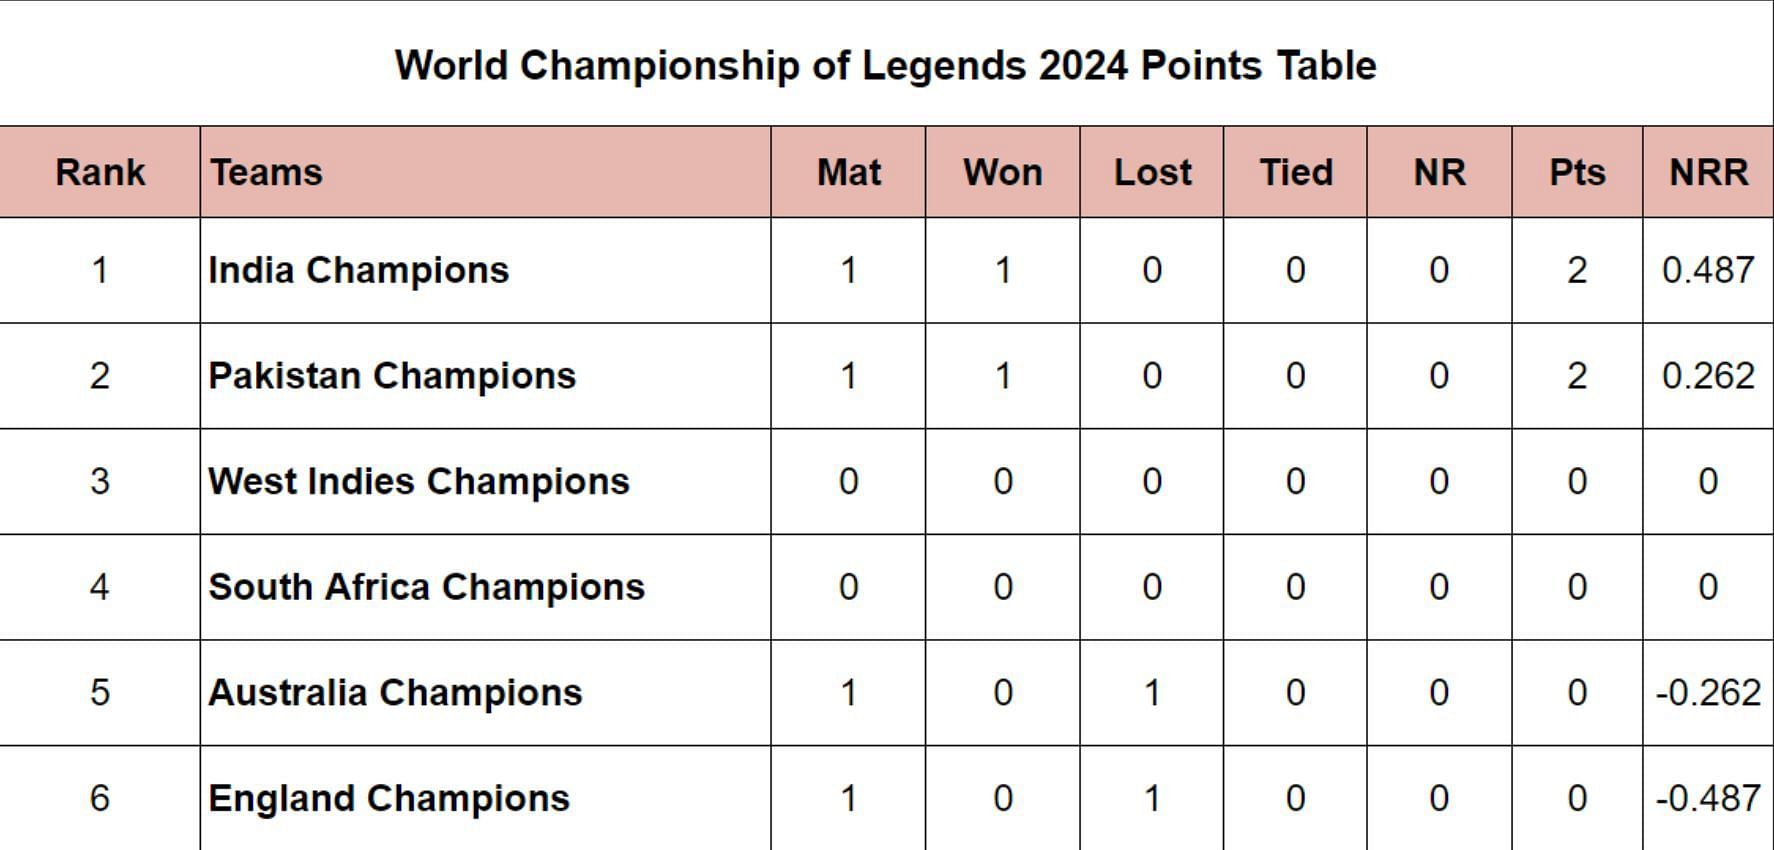 World Championship of Legends 2024 Points Table: Updated Standings after Australia vs Pakistan, Match 2